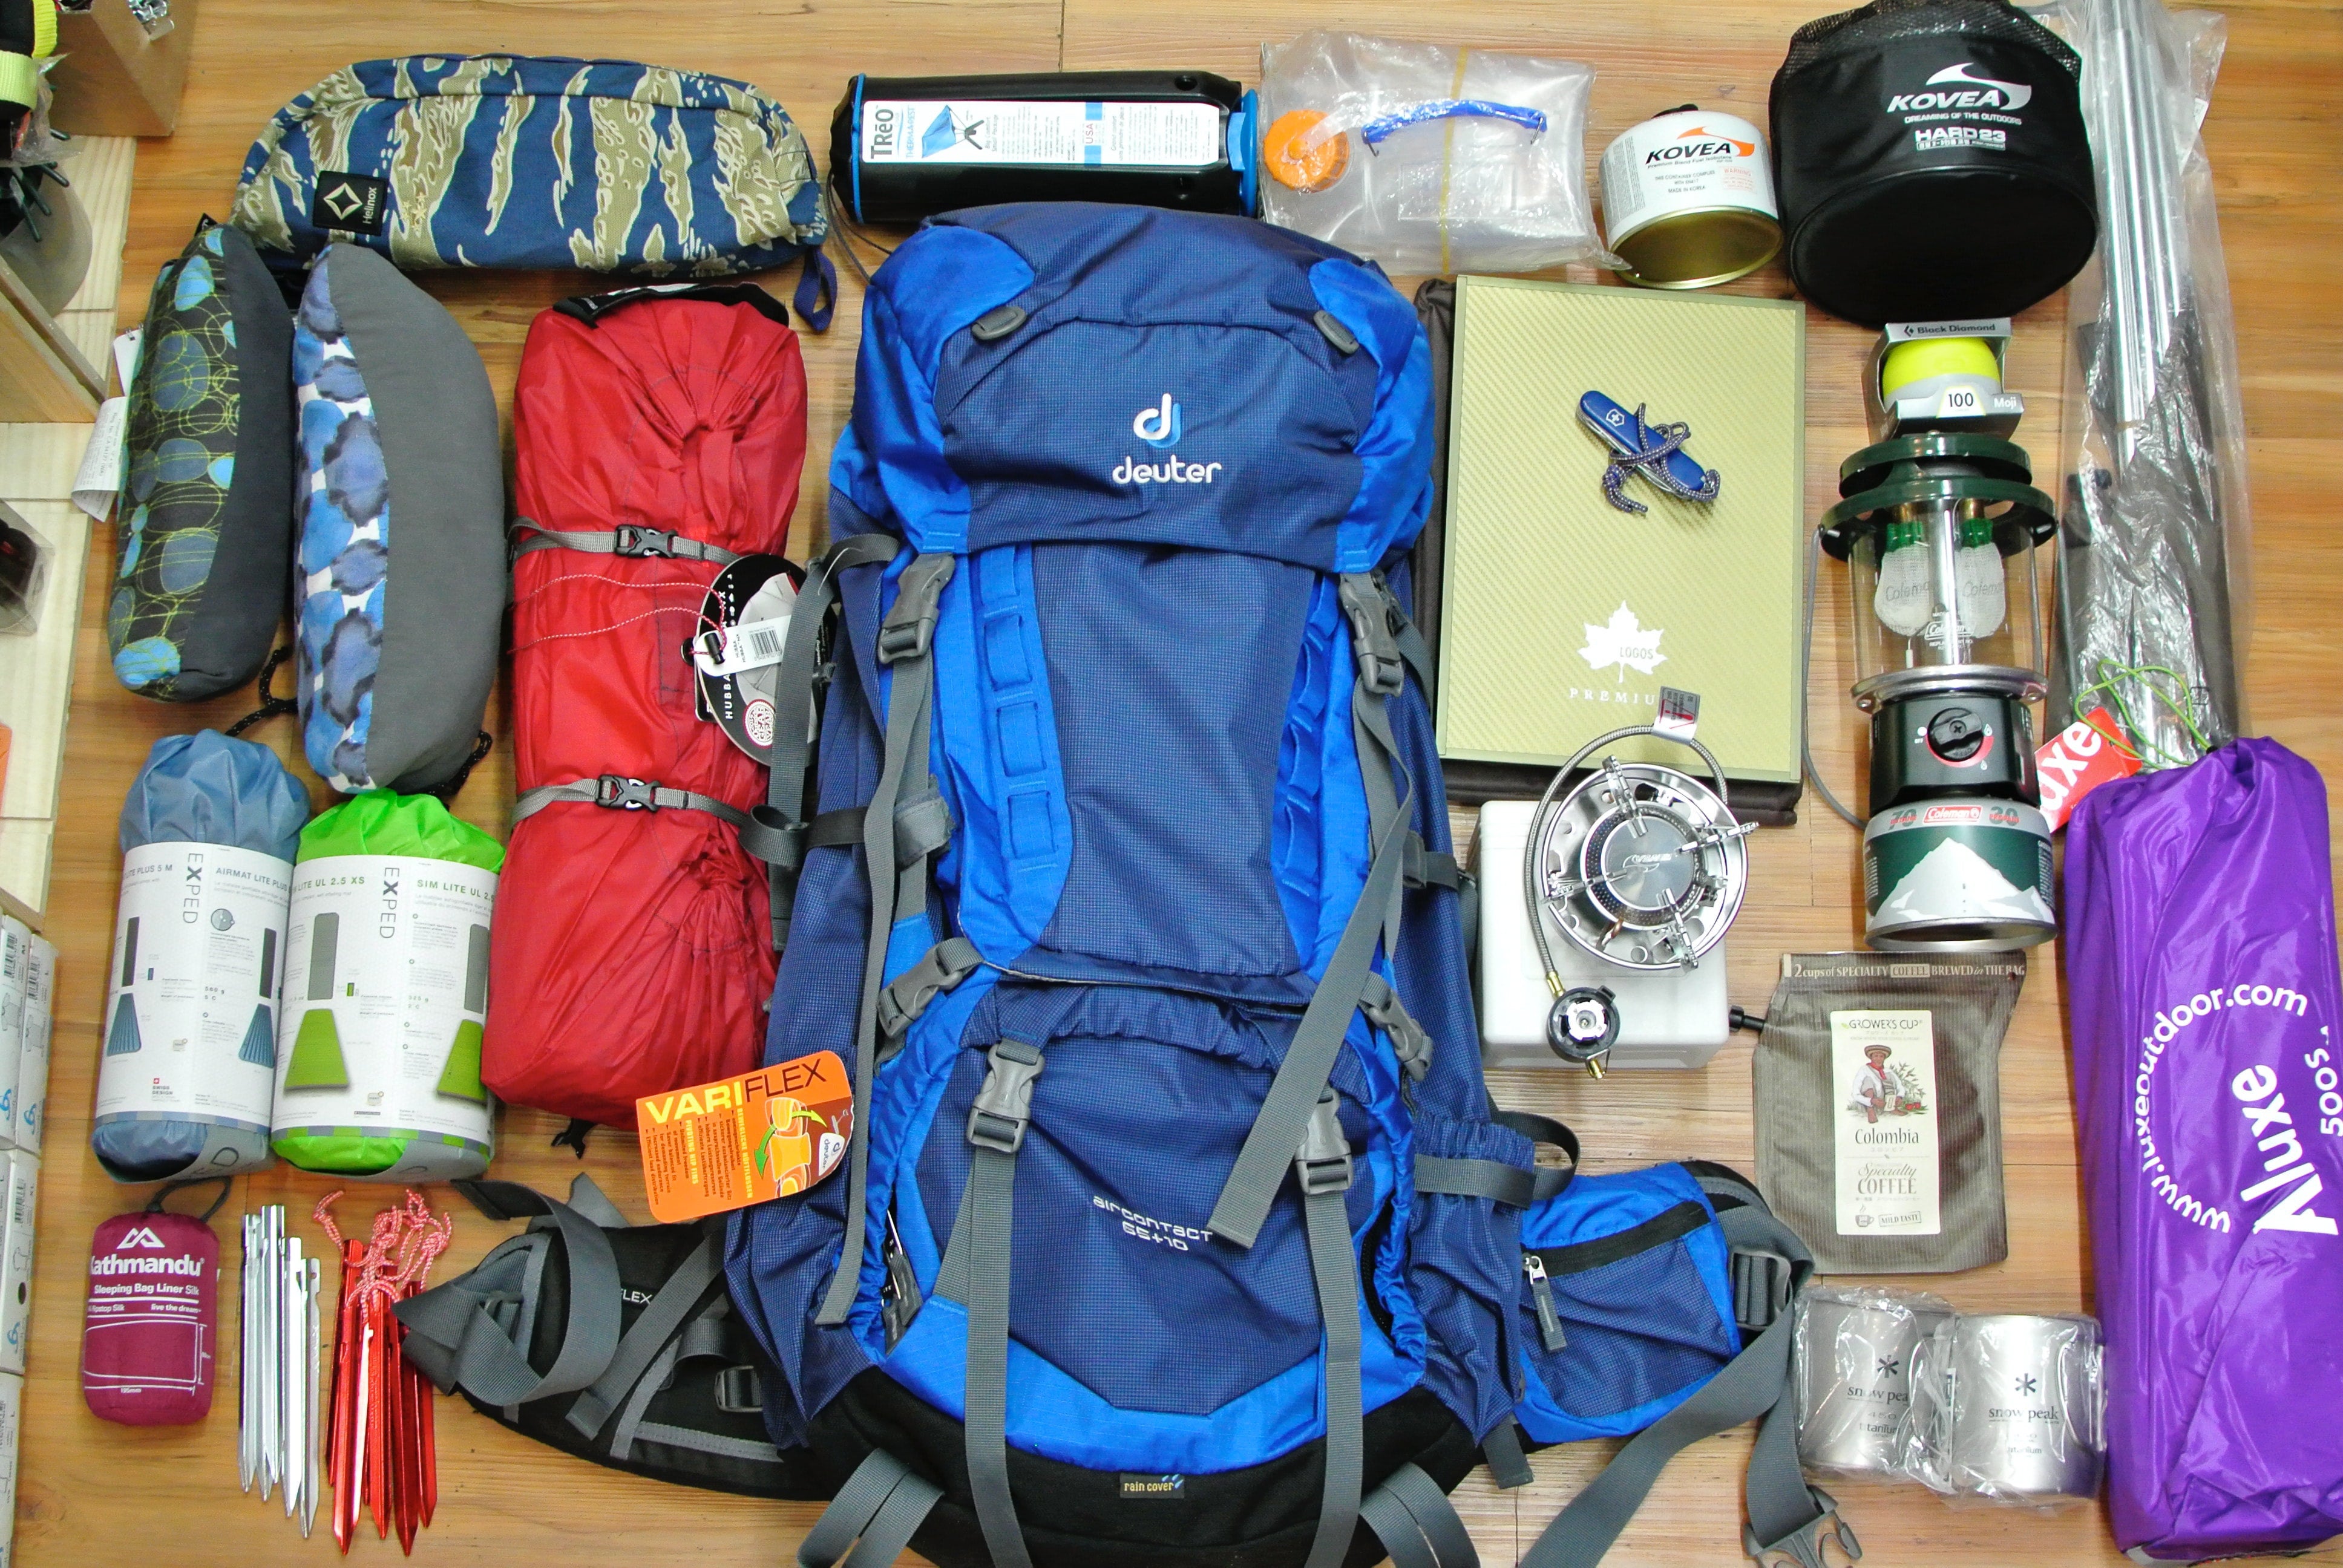 Camping/Hiking Accessories